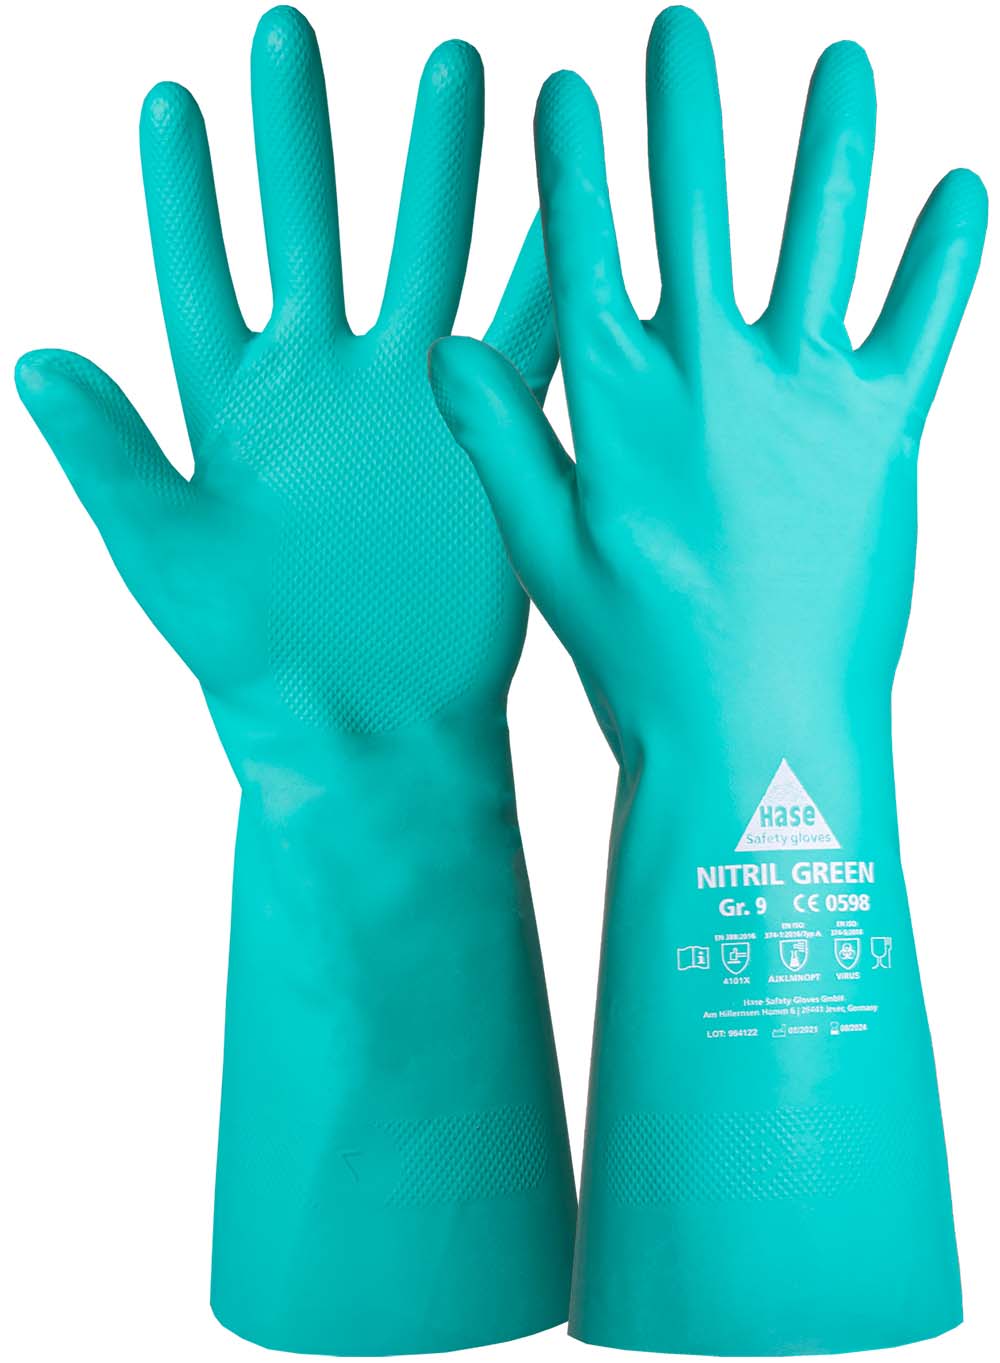 HASE Chemikalienschutzhandschuh "Nitril Green" Nr. 904000, VPE: 10 PA